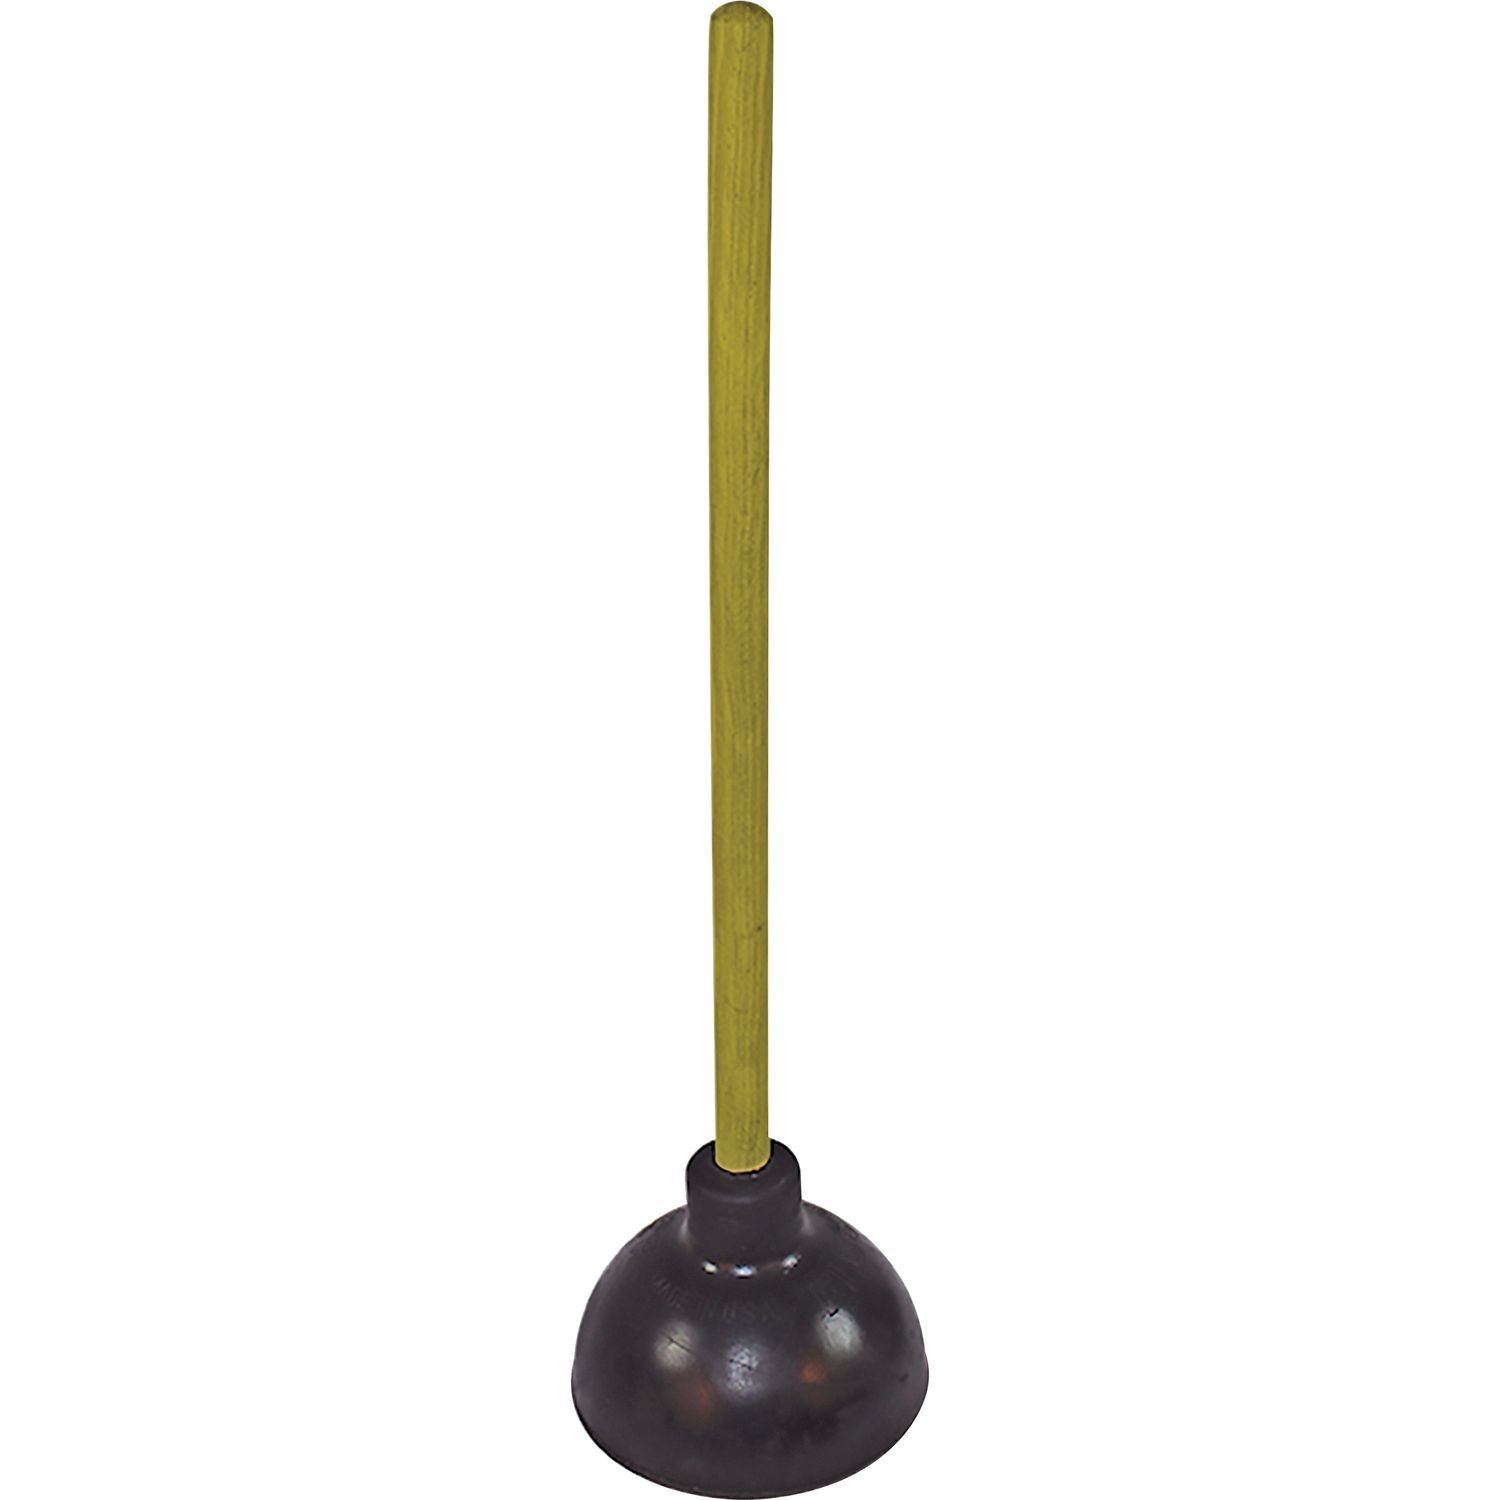 Value Plus Plunger 5.75" Cup Diameter, 23" Length, Yellow